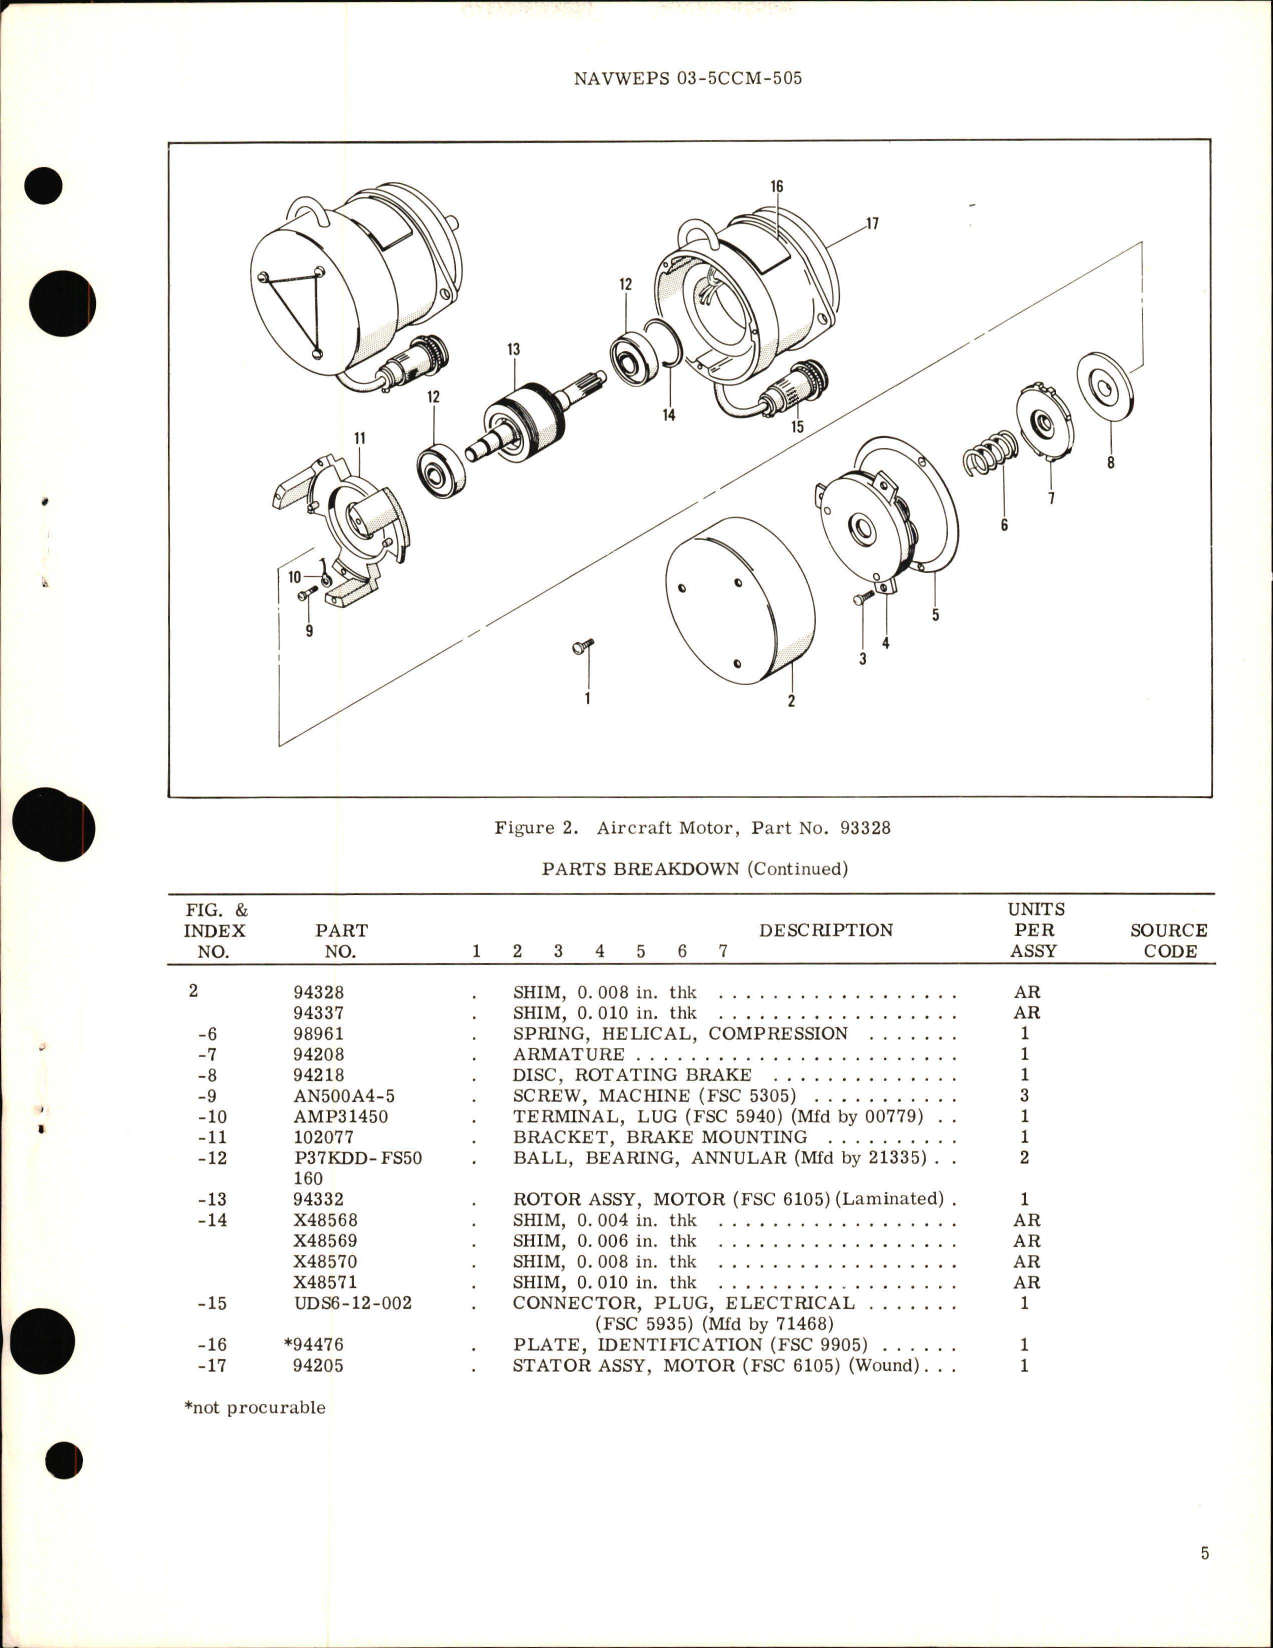 Sample page 5 from AirCorps Library document: Overhaul Instructions with Parts Breakdown for  Aircraft Motor - Part 93328, 400712 and 404343